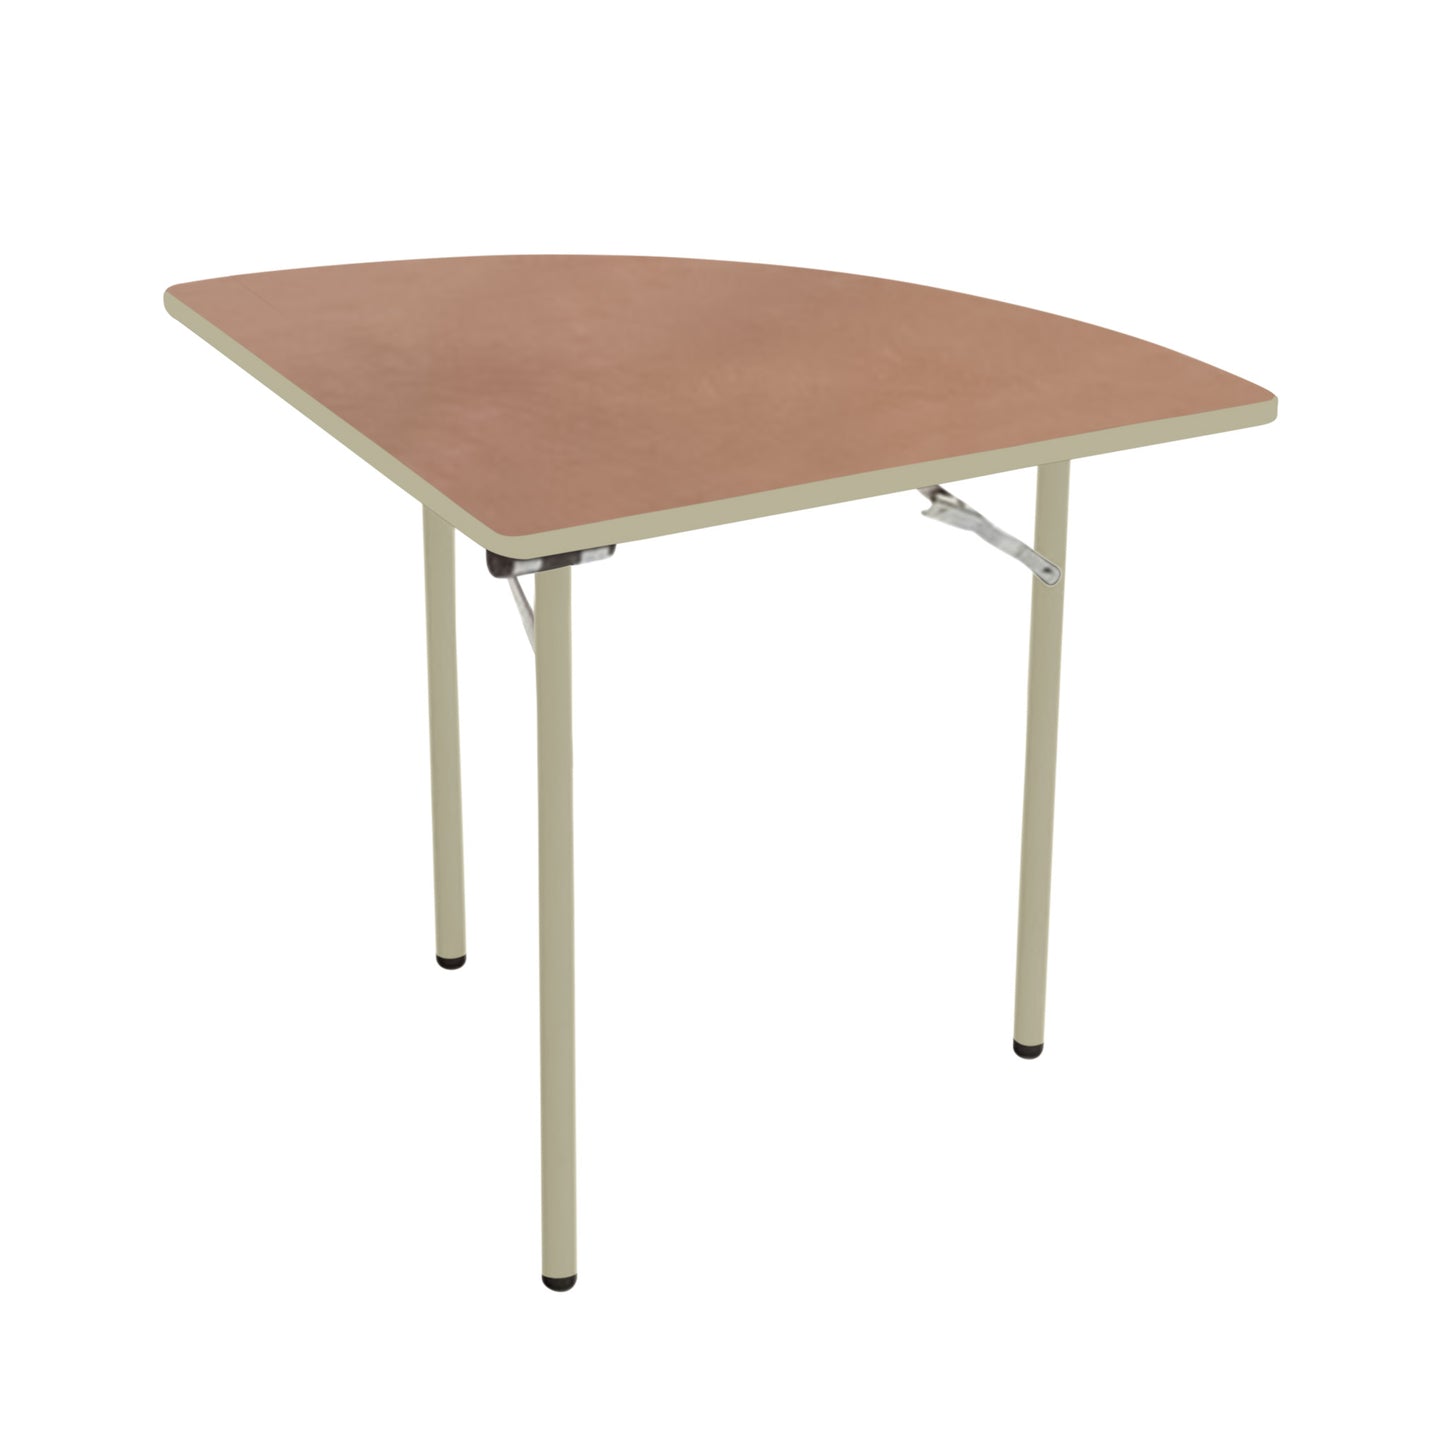 AmTab Folding Table - Plywood Stained and Sealed - Vinyl T-Molding Edge - Quarter Round - Quarter 96" Diameter x 29"H  (AmTab AMT-QR96PM)